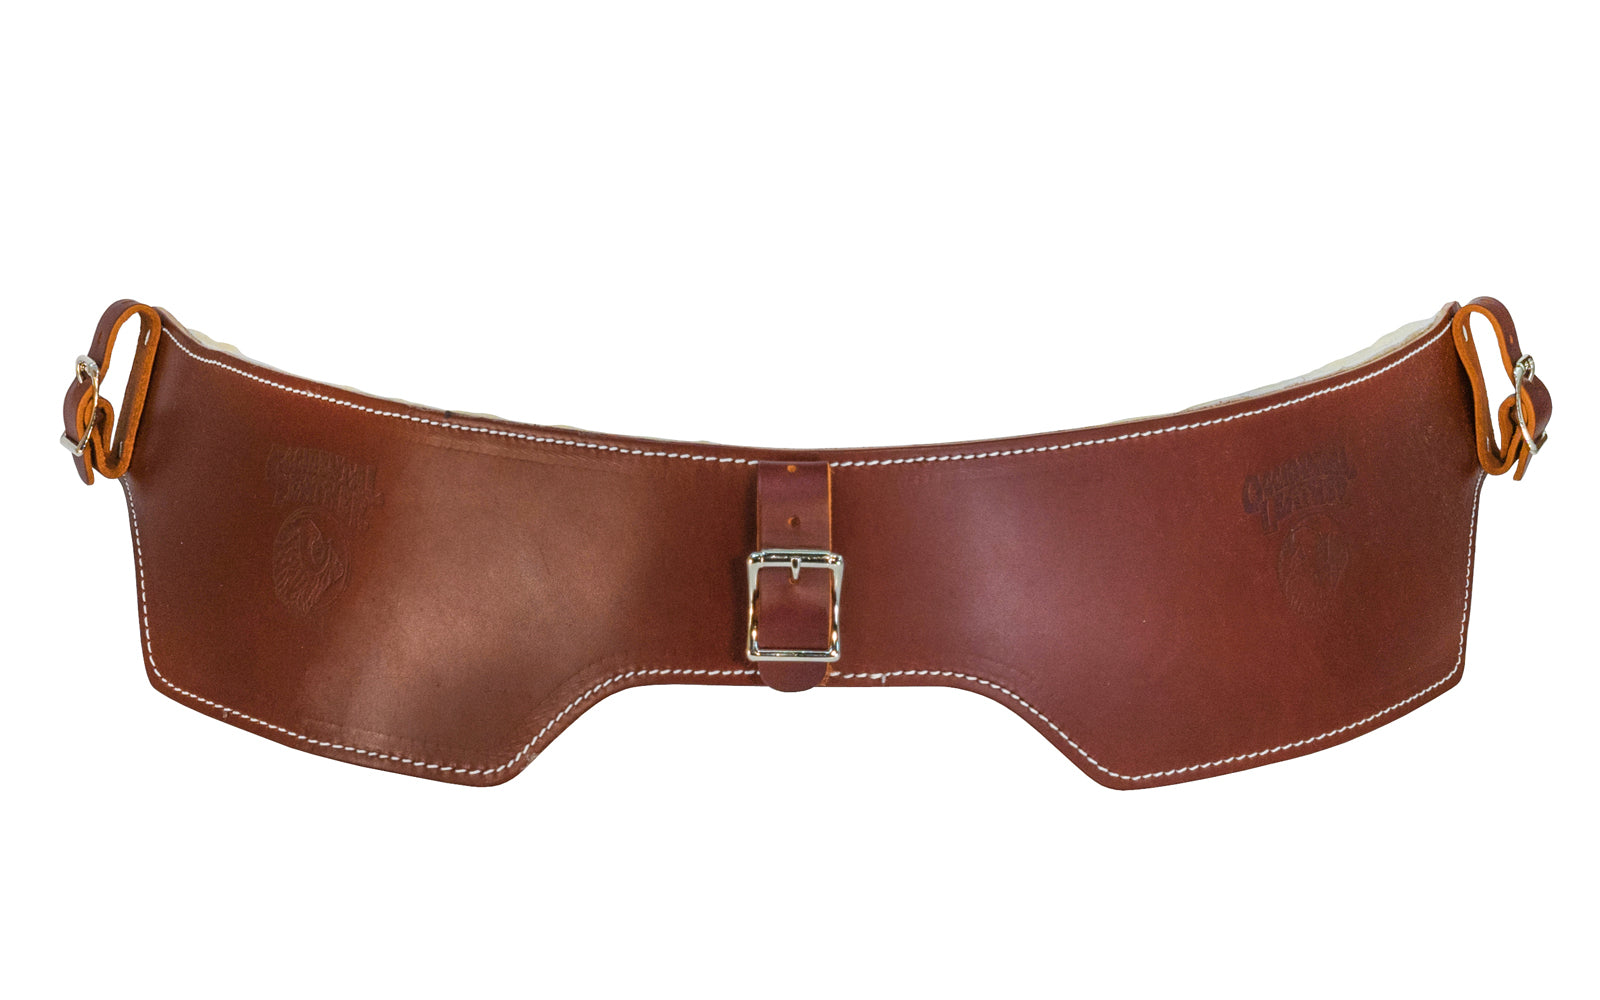 Occidental Leather's Belt Liner with Sheepskin relieves you from cutting edges & circulation problems associated with safety & tool belts. Sheepskin pads provide maximum comfort & is a natural insulator, warm & comfortable in winter, & cool in summer. Comfortable when using with tool belts. Model 5005 L - Large Size - 759244004502